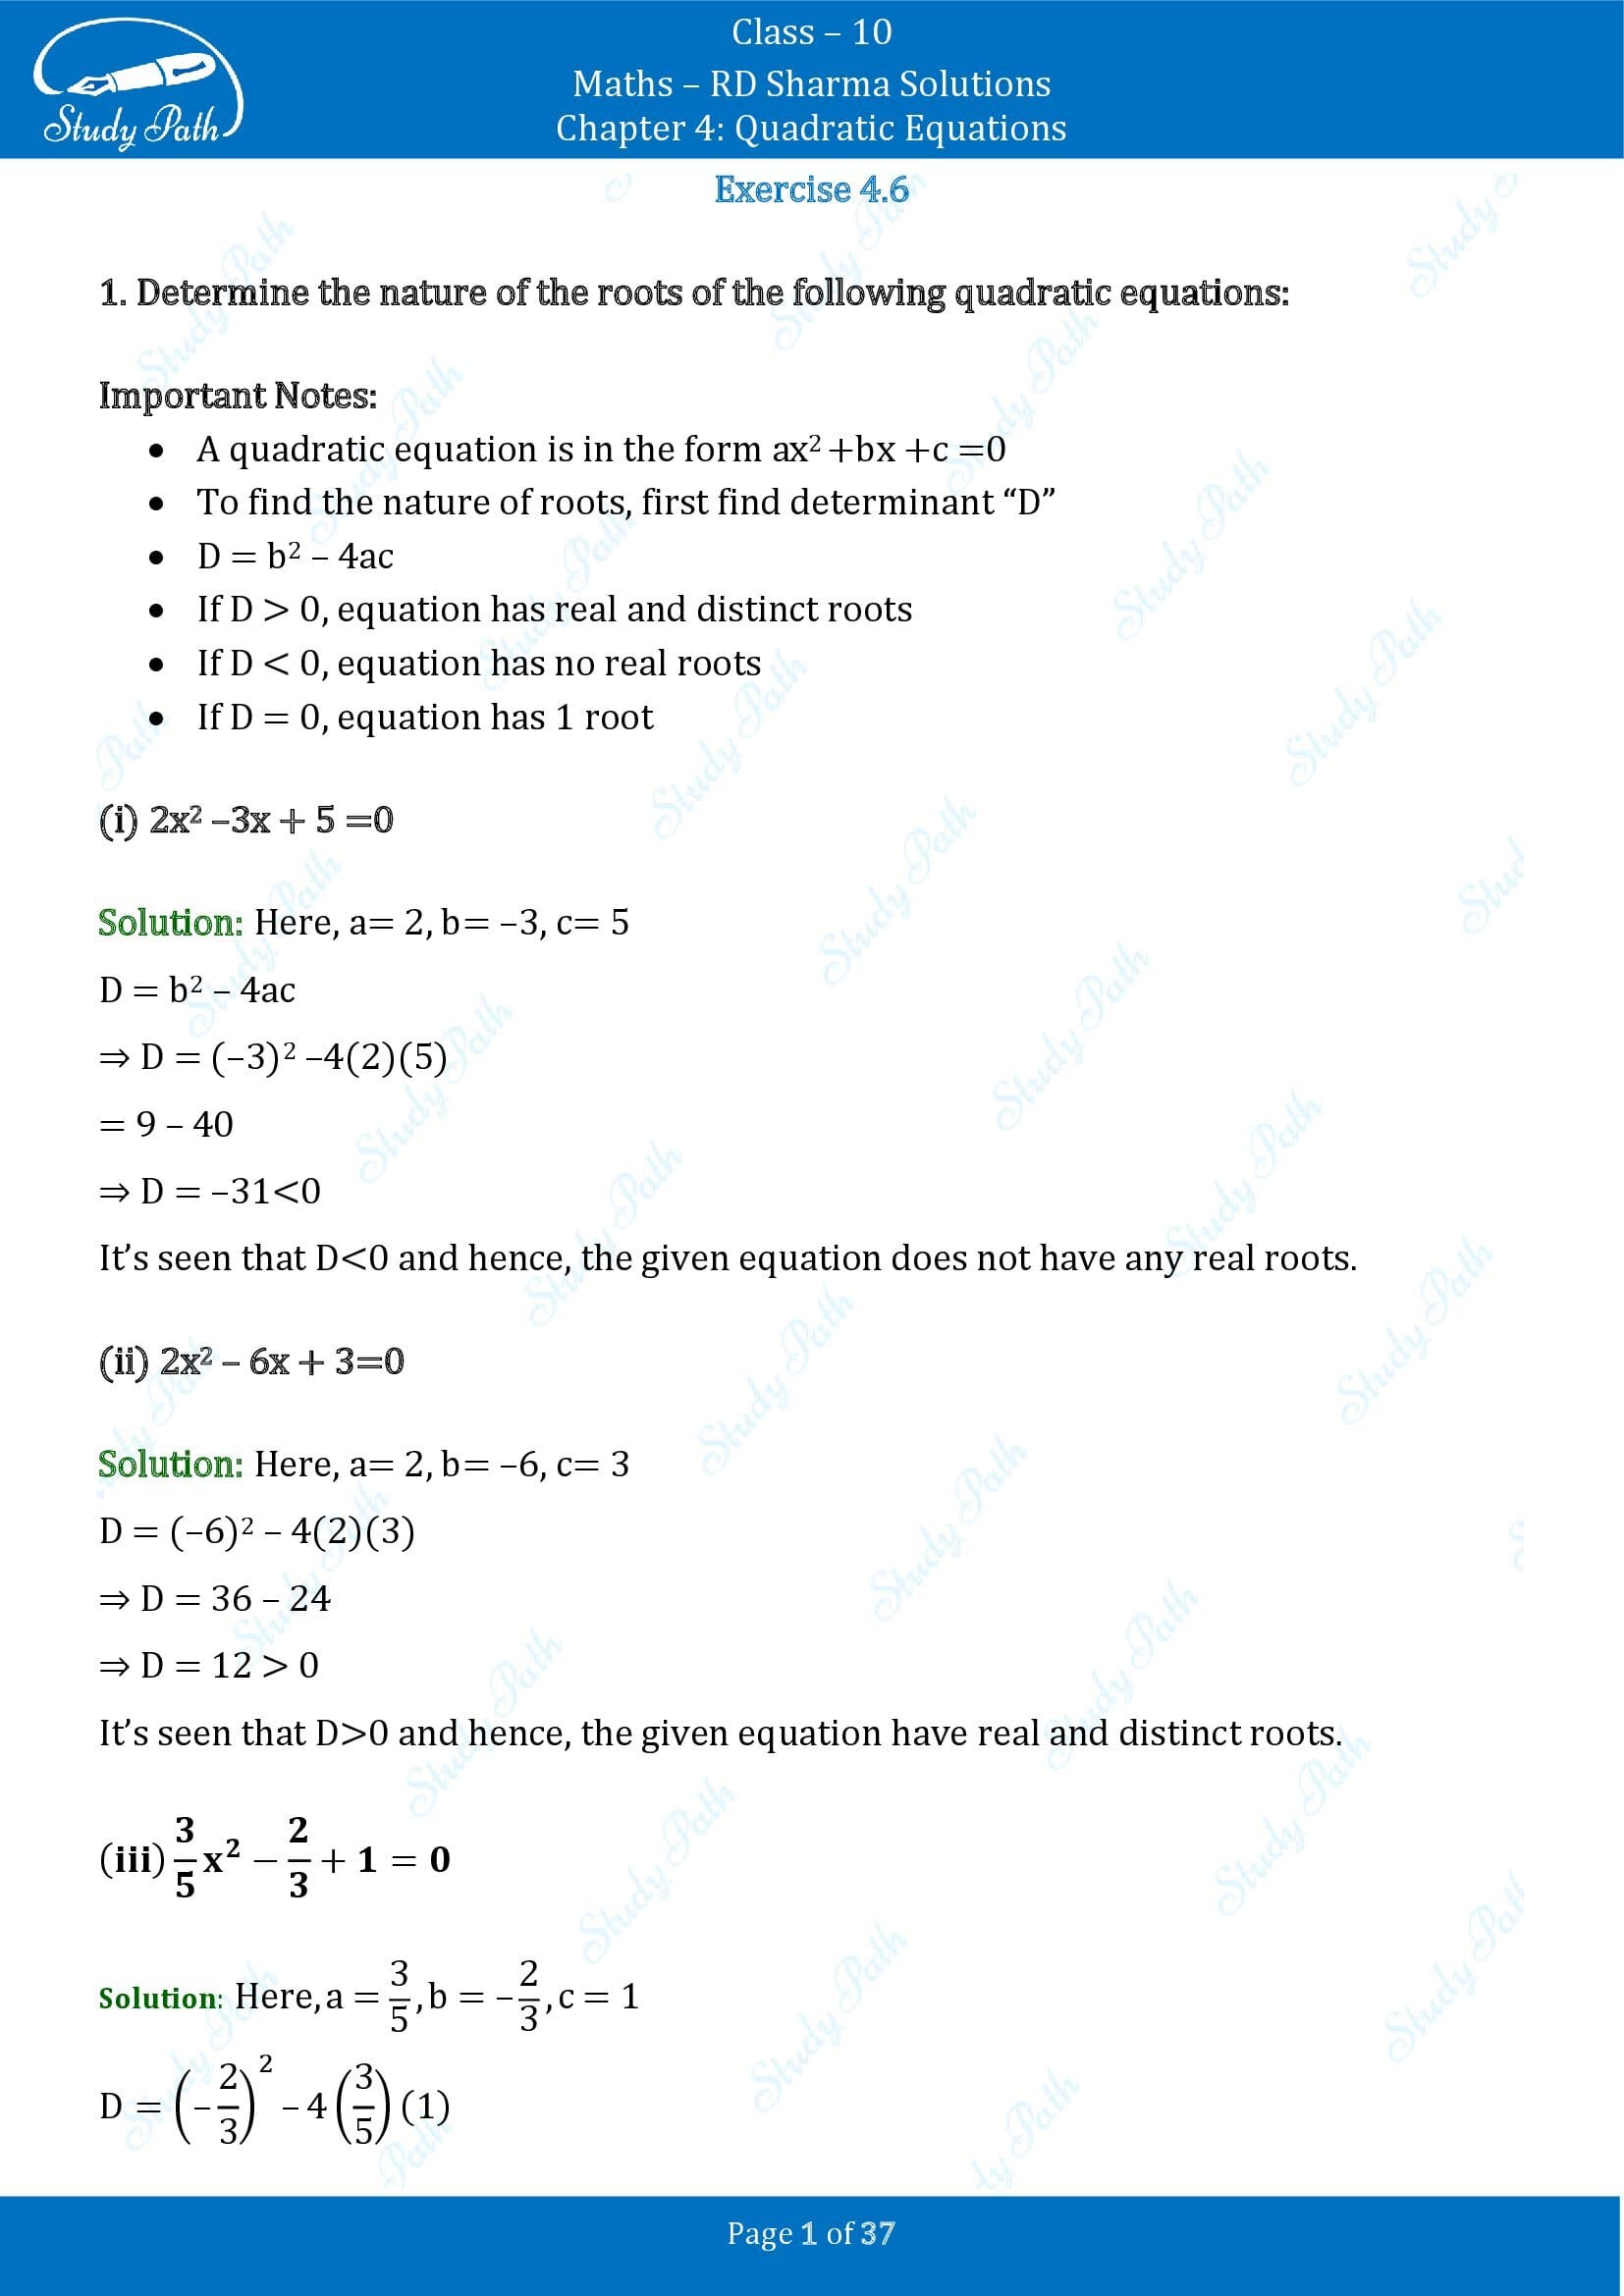 RD Sharma Solutions Class 10 Chapter 4 Quadratic Equations Exercise 4.6 00001